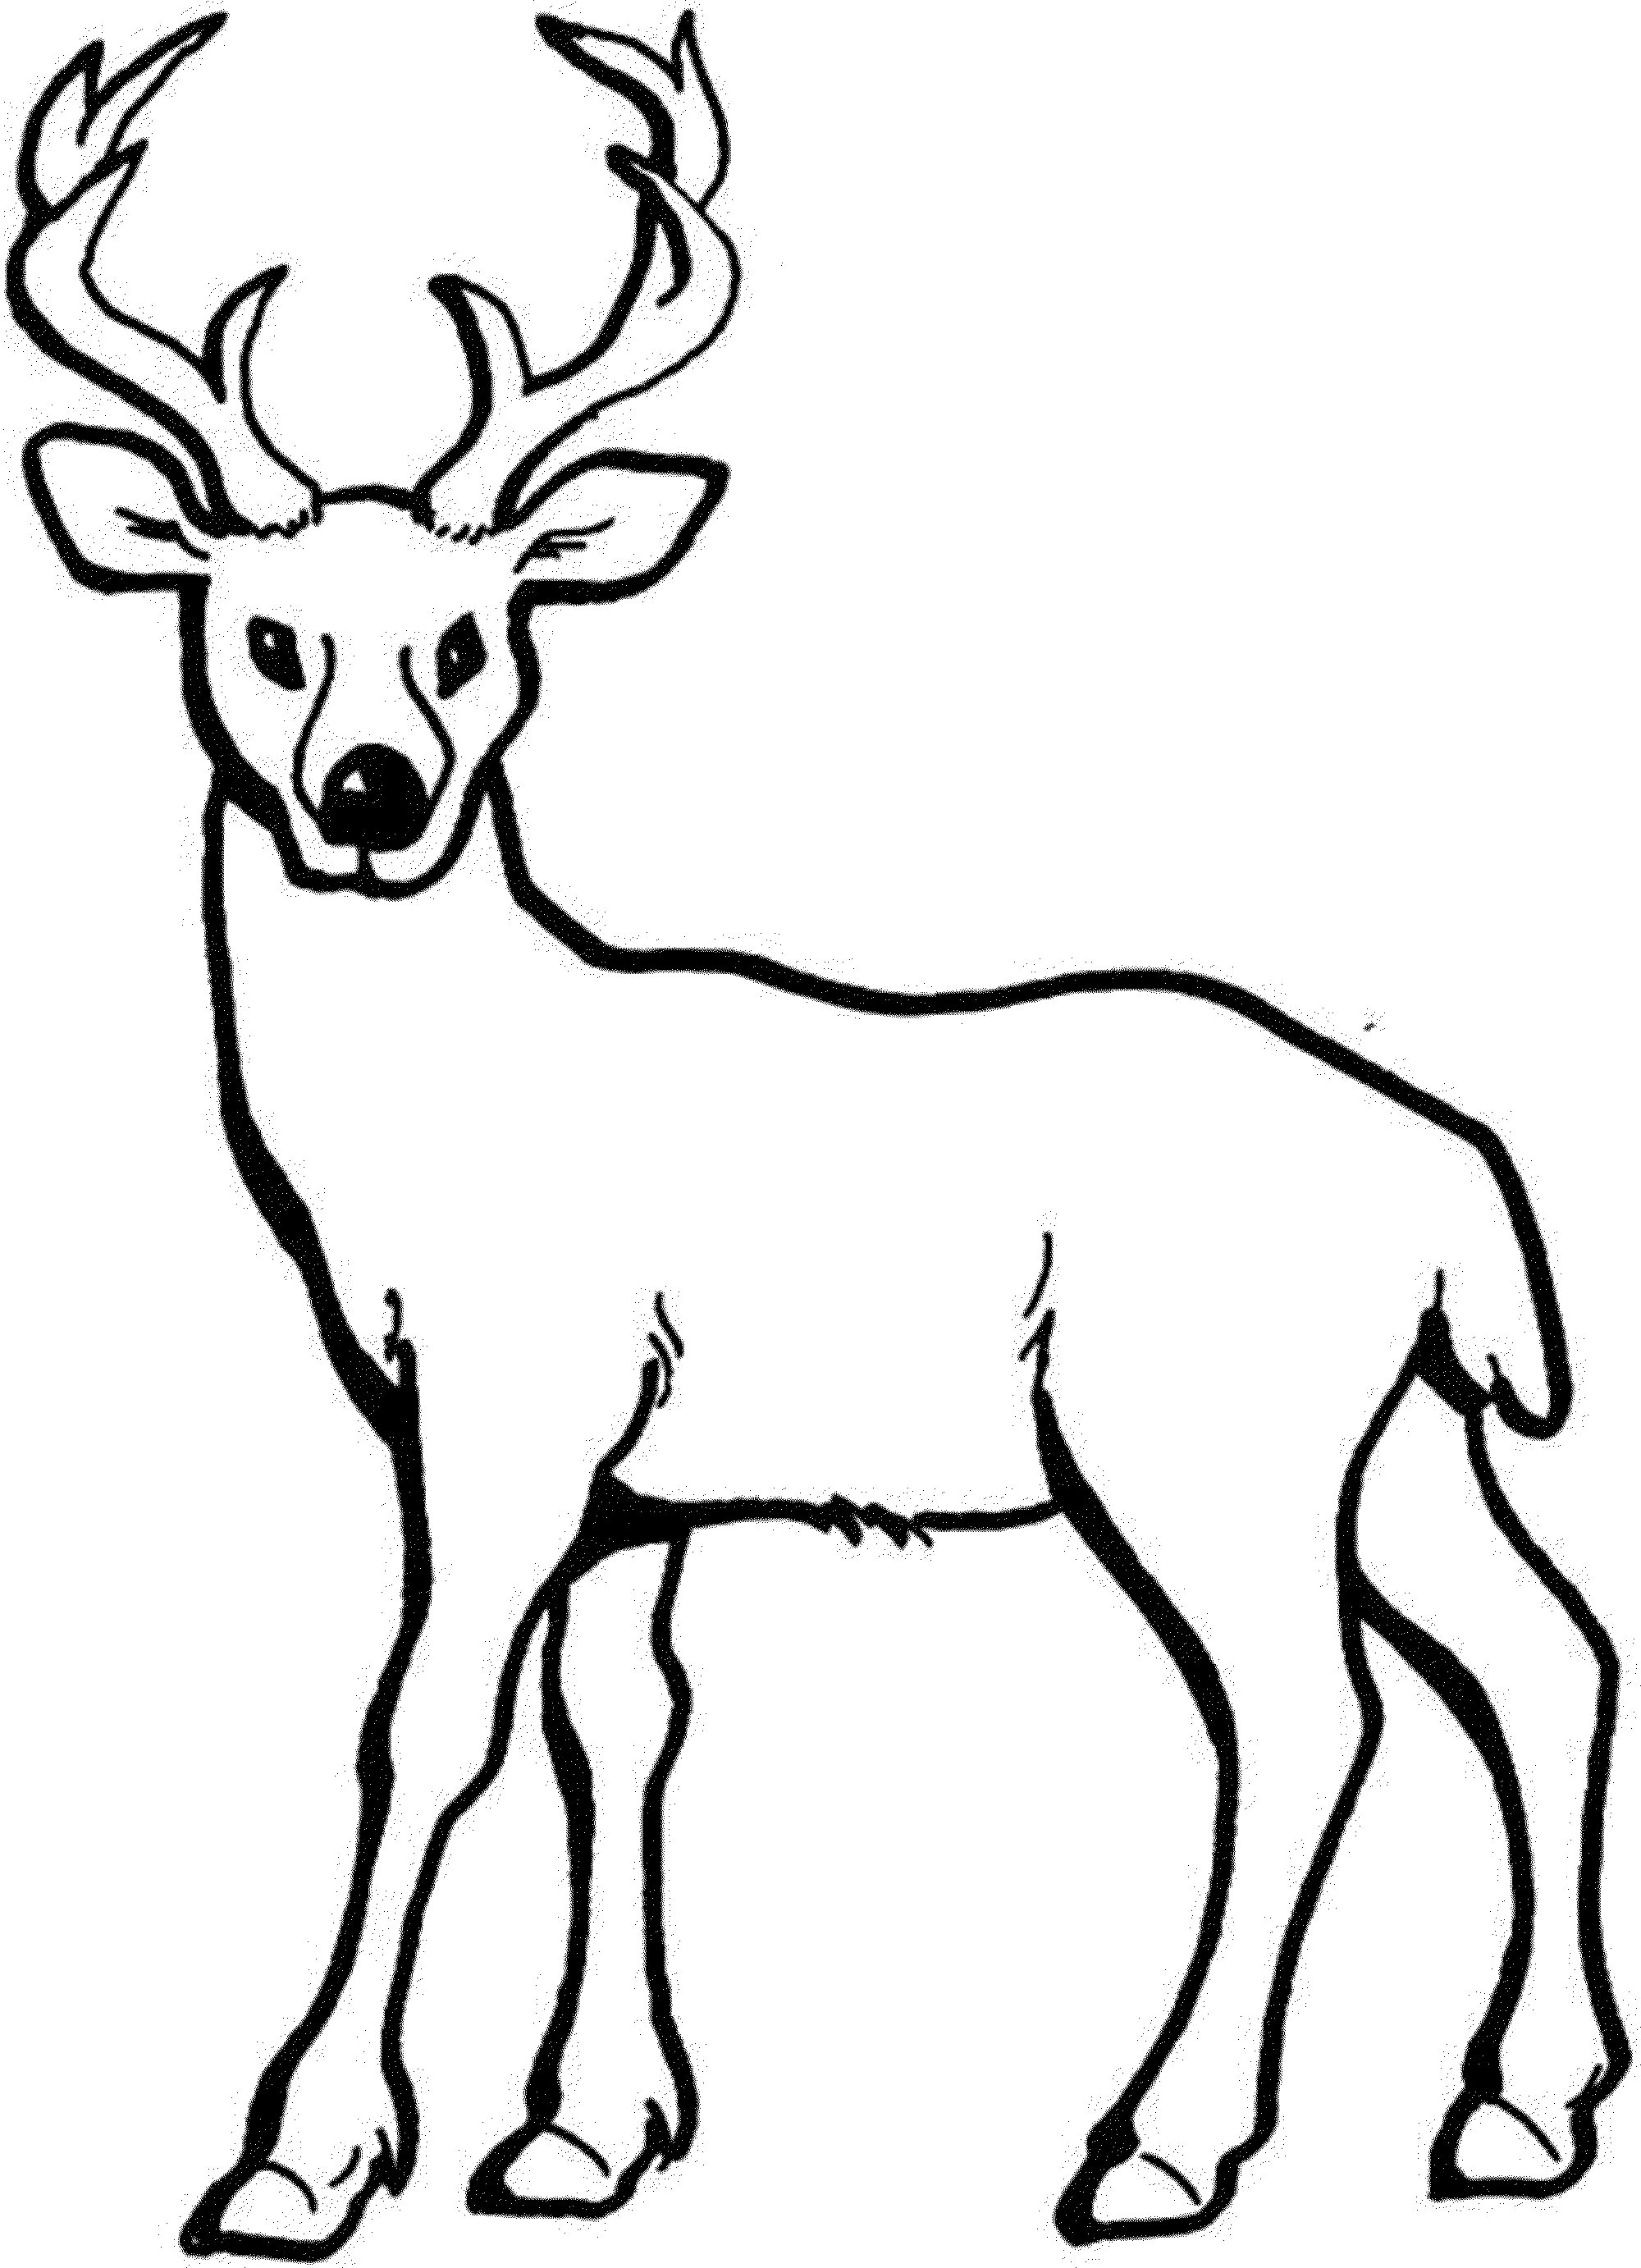 coloring pages of deer - Printable Kids Colouring Pages | Deer coloring  pages, Animal coloring pages, Animal coloring books